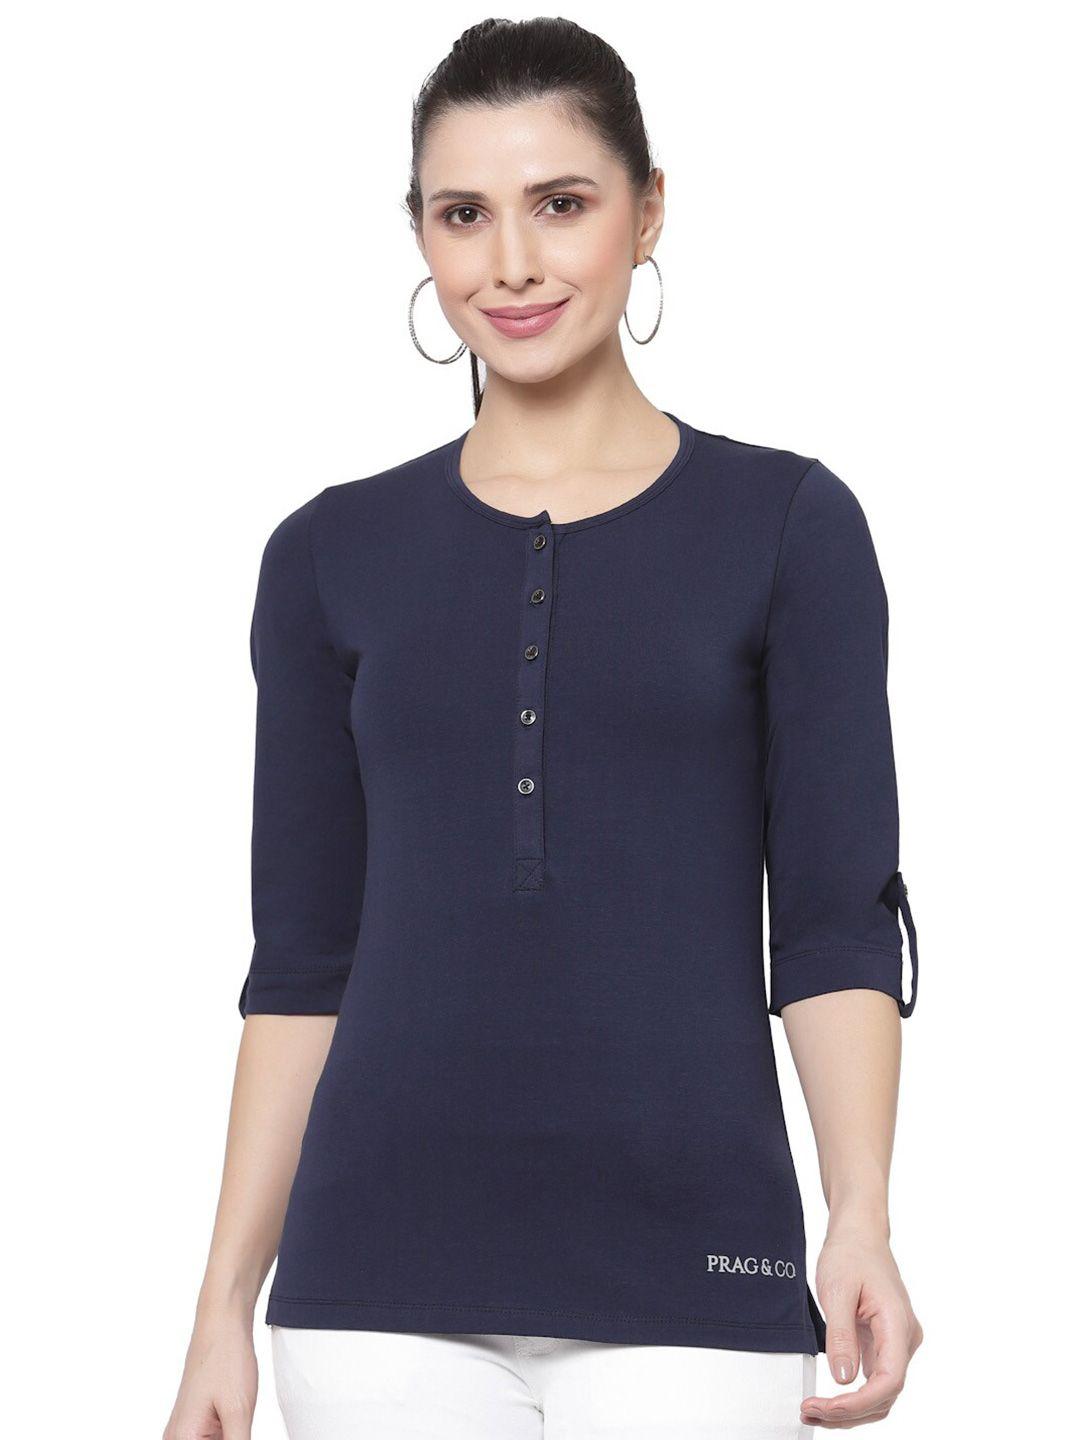 prag & co women navy blue henley neck roll-up sleeves antimicrobial t-shirt